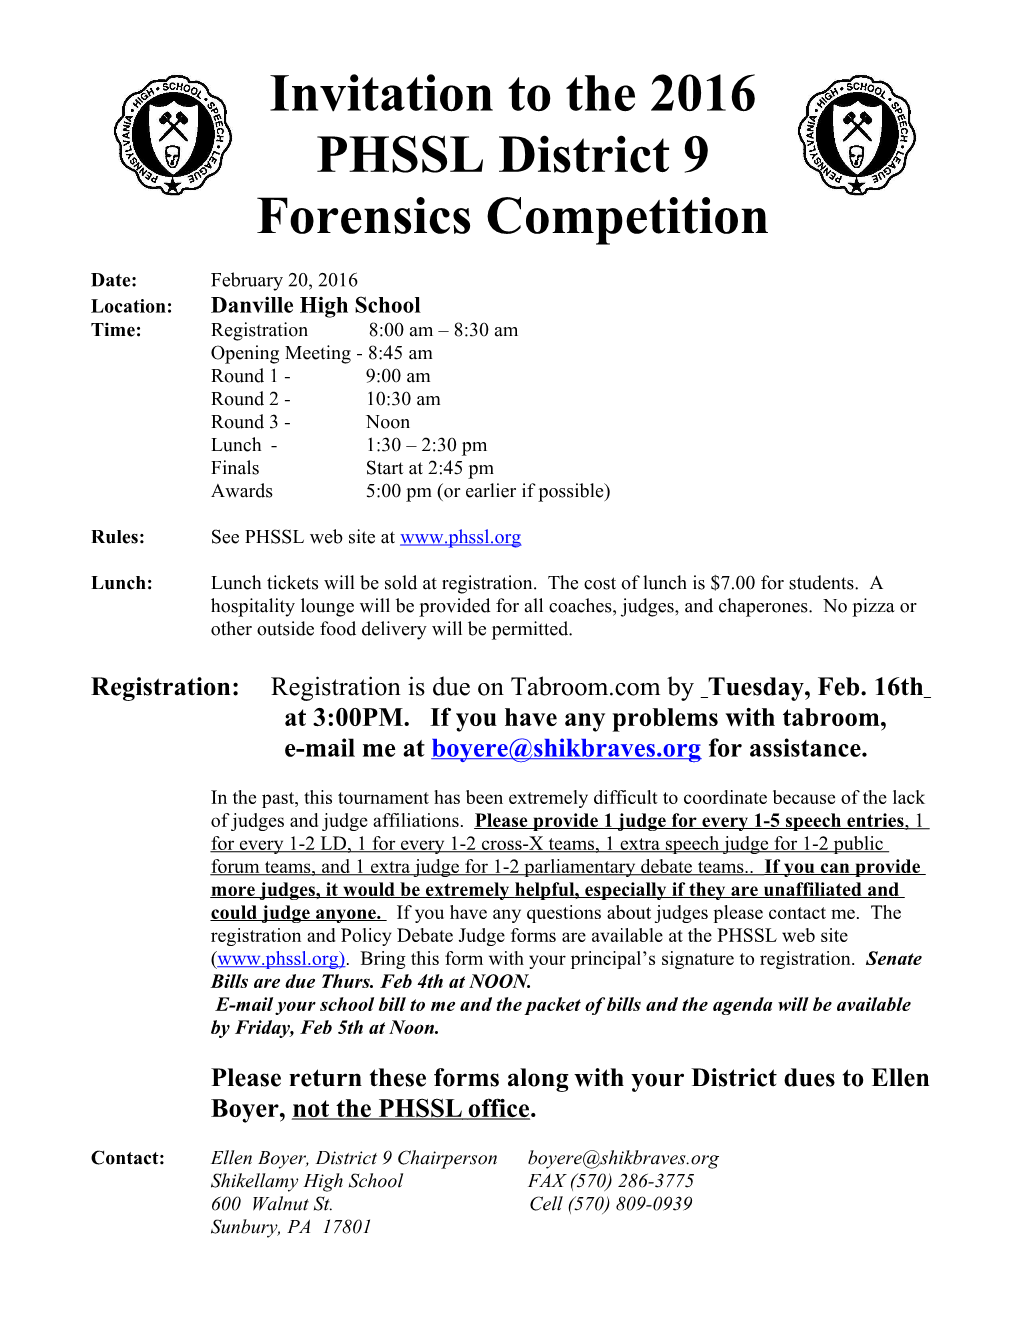 Invitation to the PHSSL District 9 Forensics Competition